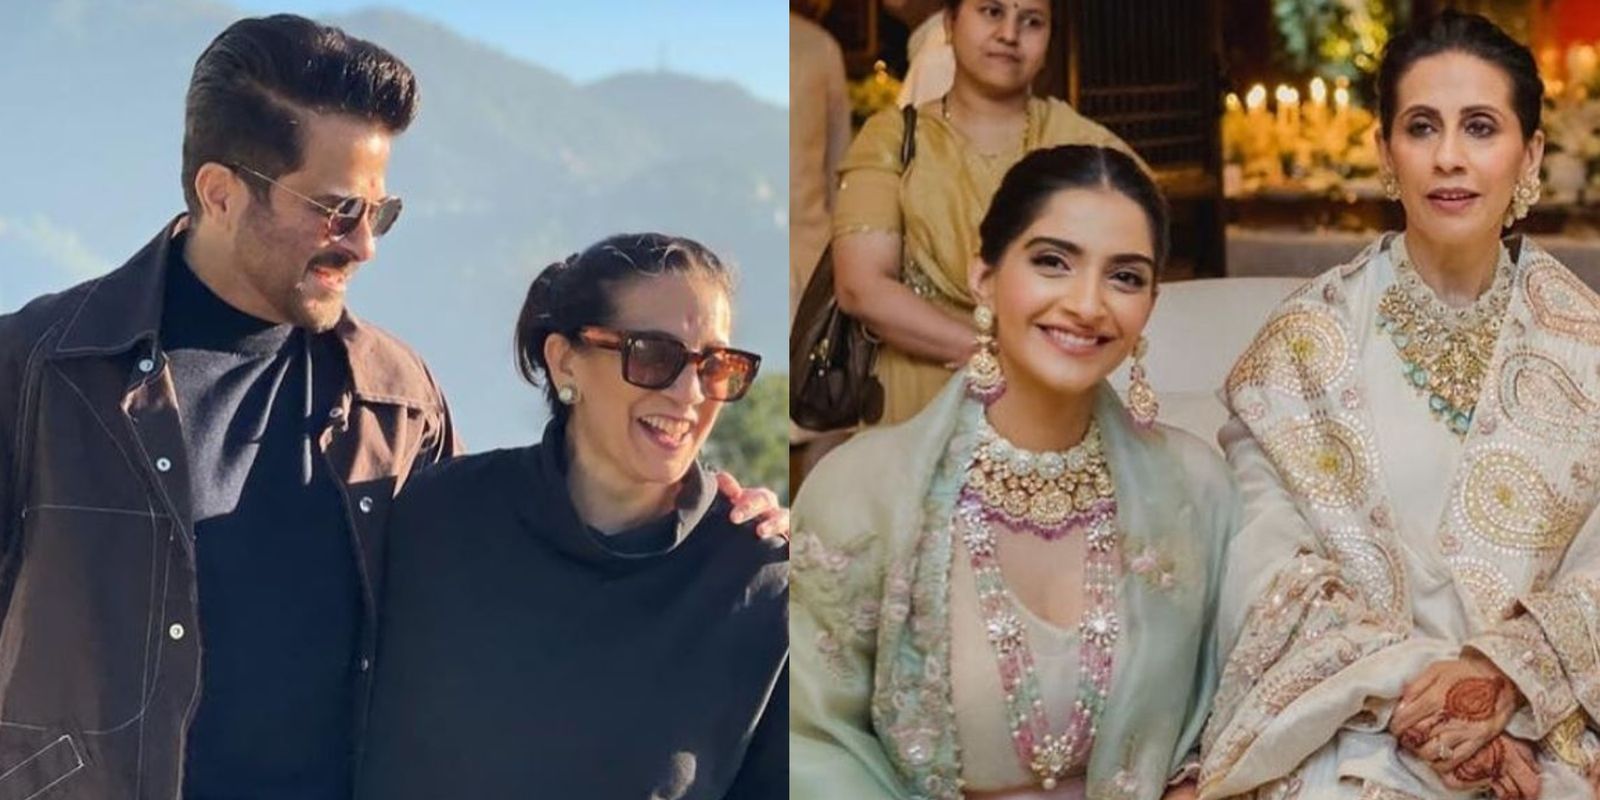 Anil Kapoor Wishes The Love Of His Life, Sonam Kapoor Wishes Mother Sunita Kapoor On Her Birthday